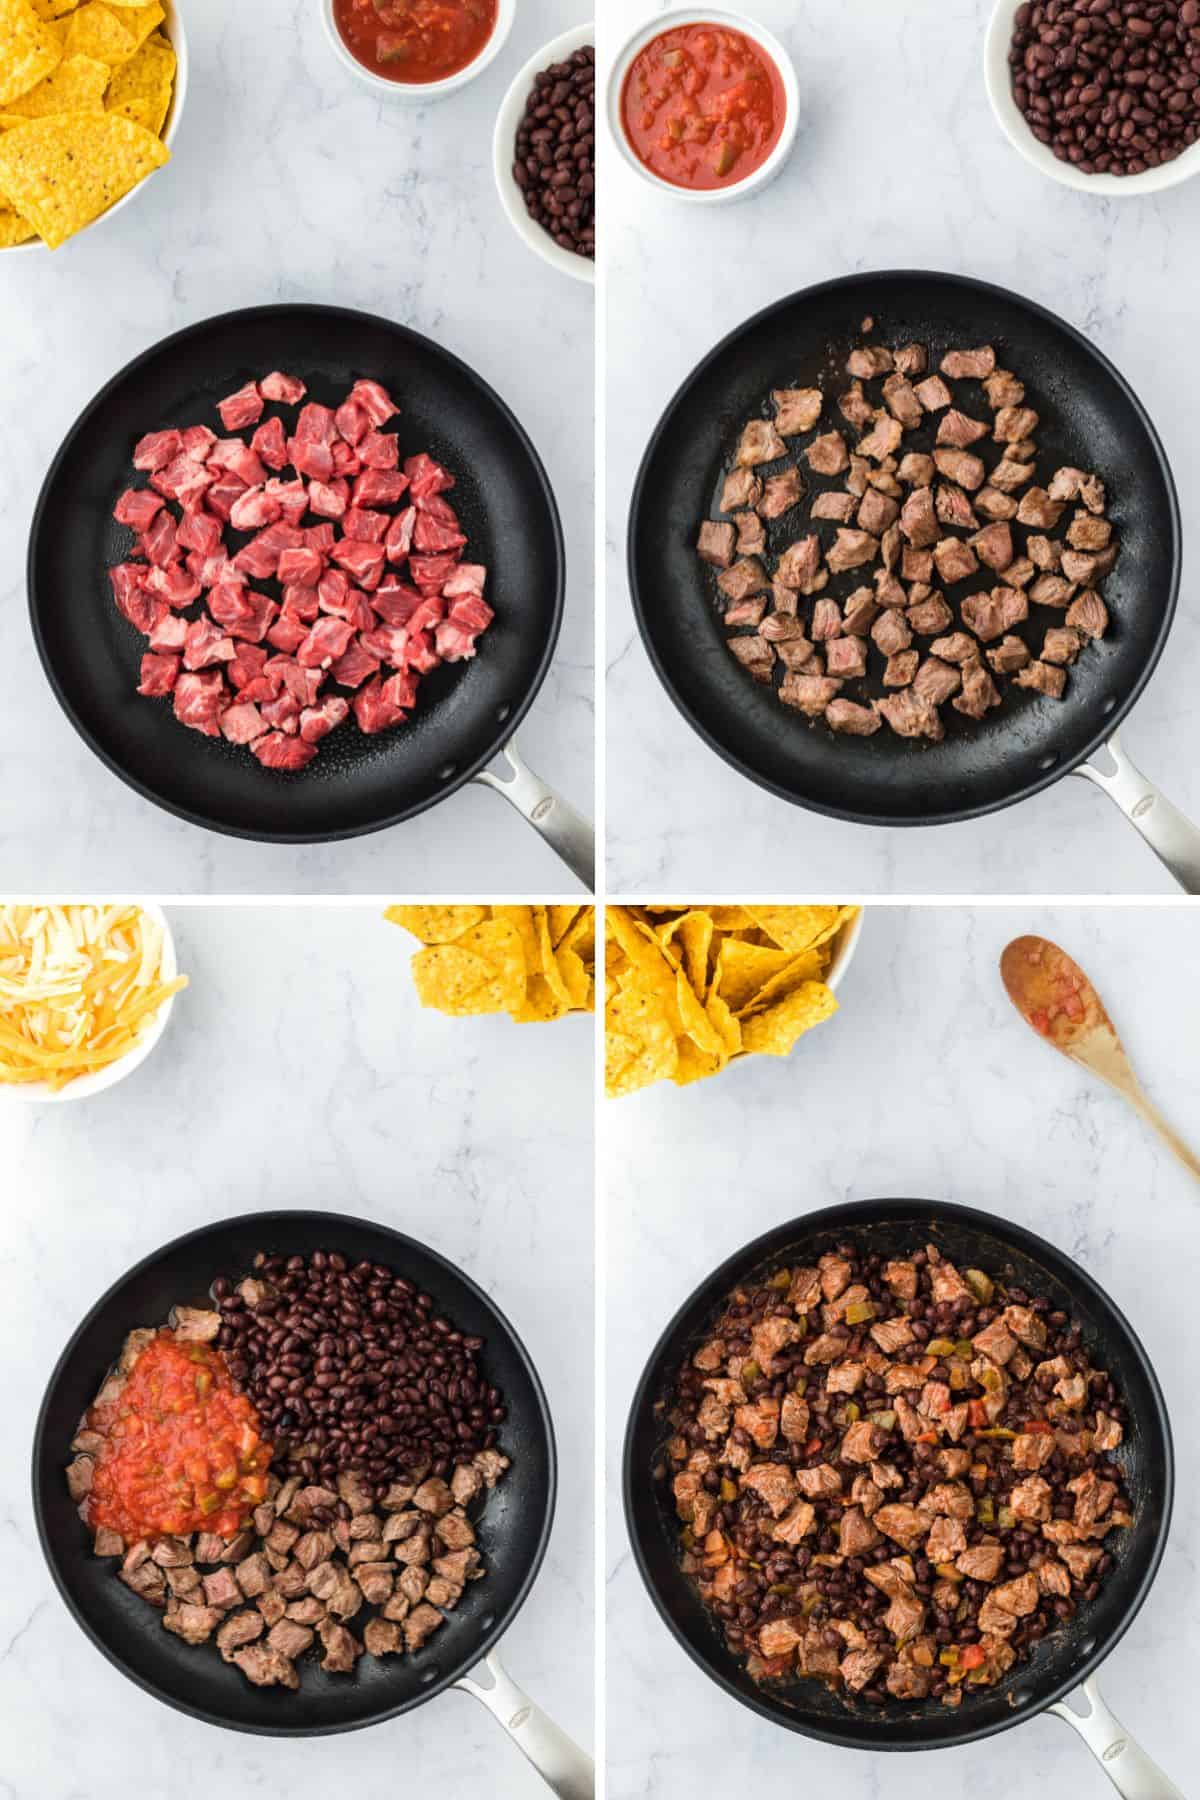 A collage of images from raw steak in a pan to adding the seasonings and beans. 